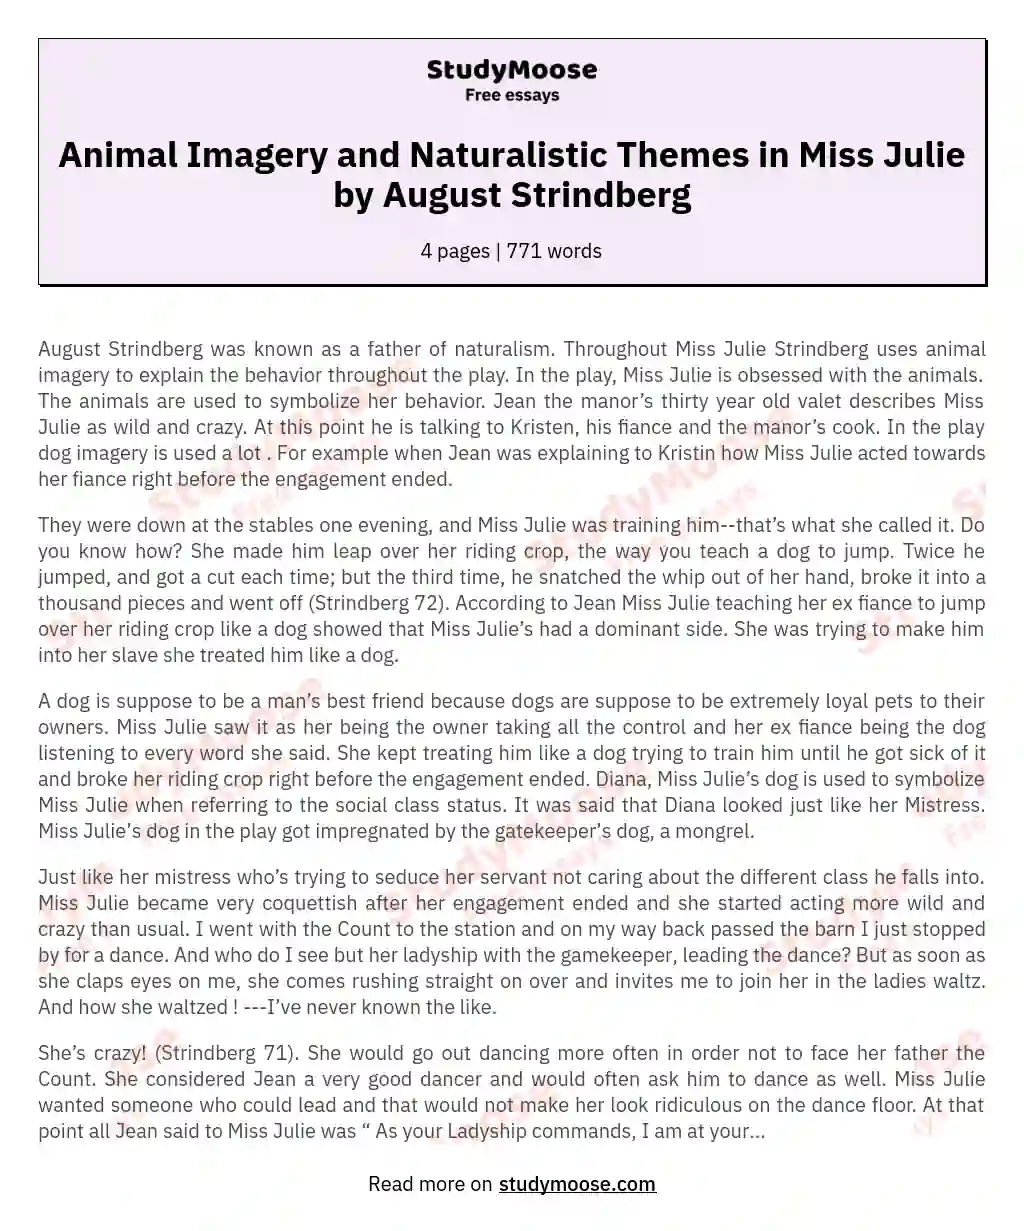 Animal Imagery and Naturalistic Themes in Miss Julie by August Strindberg essay